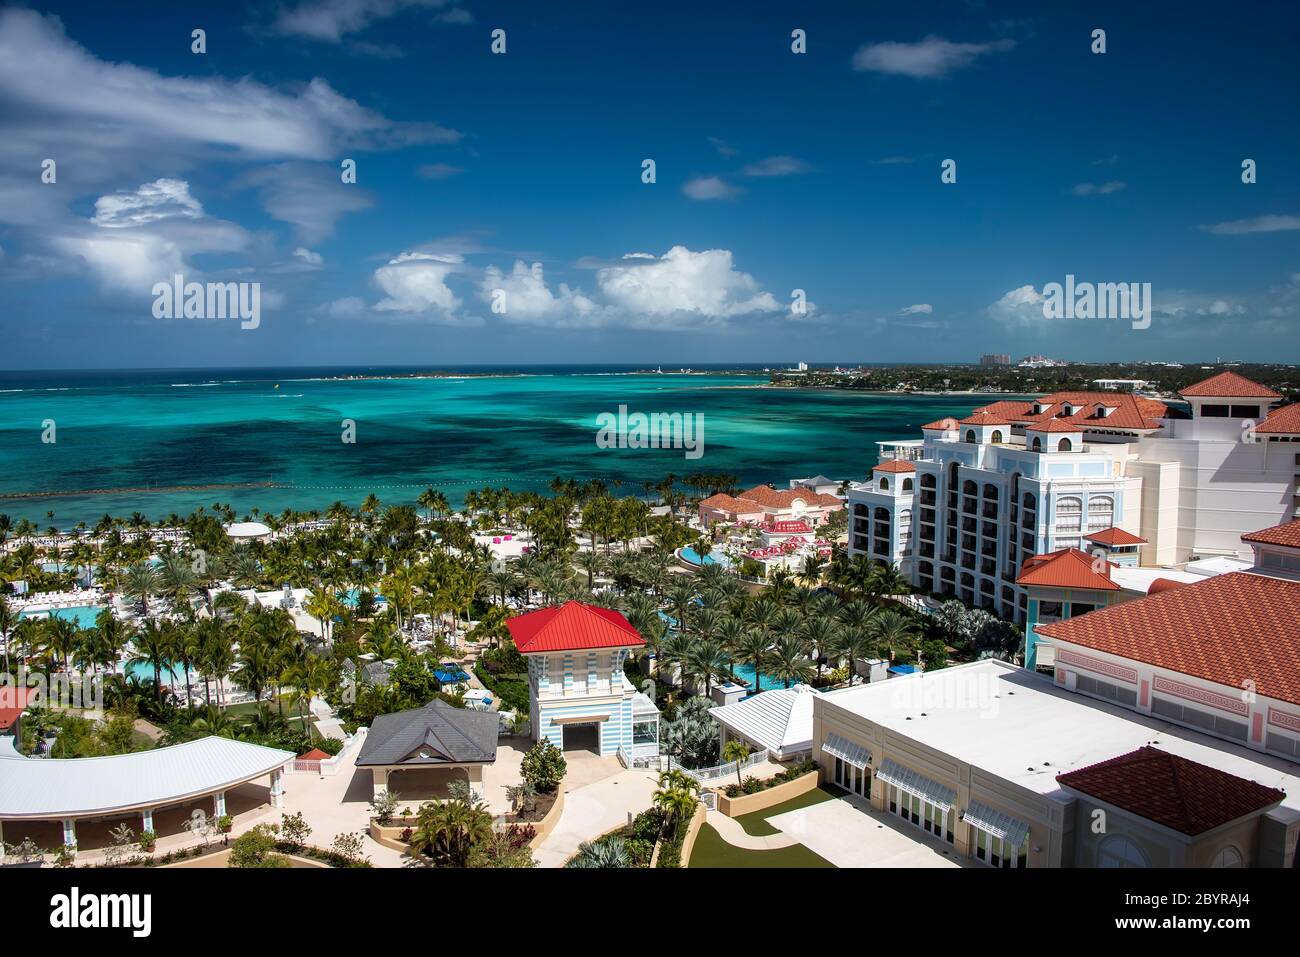 The Caribbean Sea and the resort destination in the island of Nassau, Bahamas Stock Photo